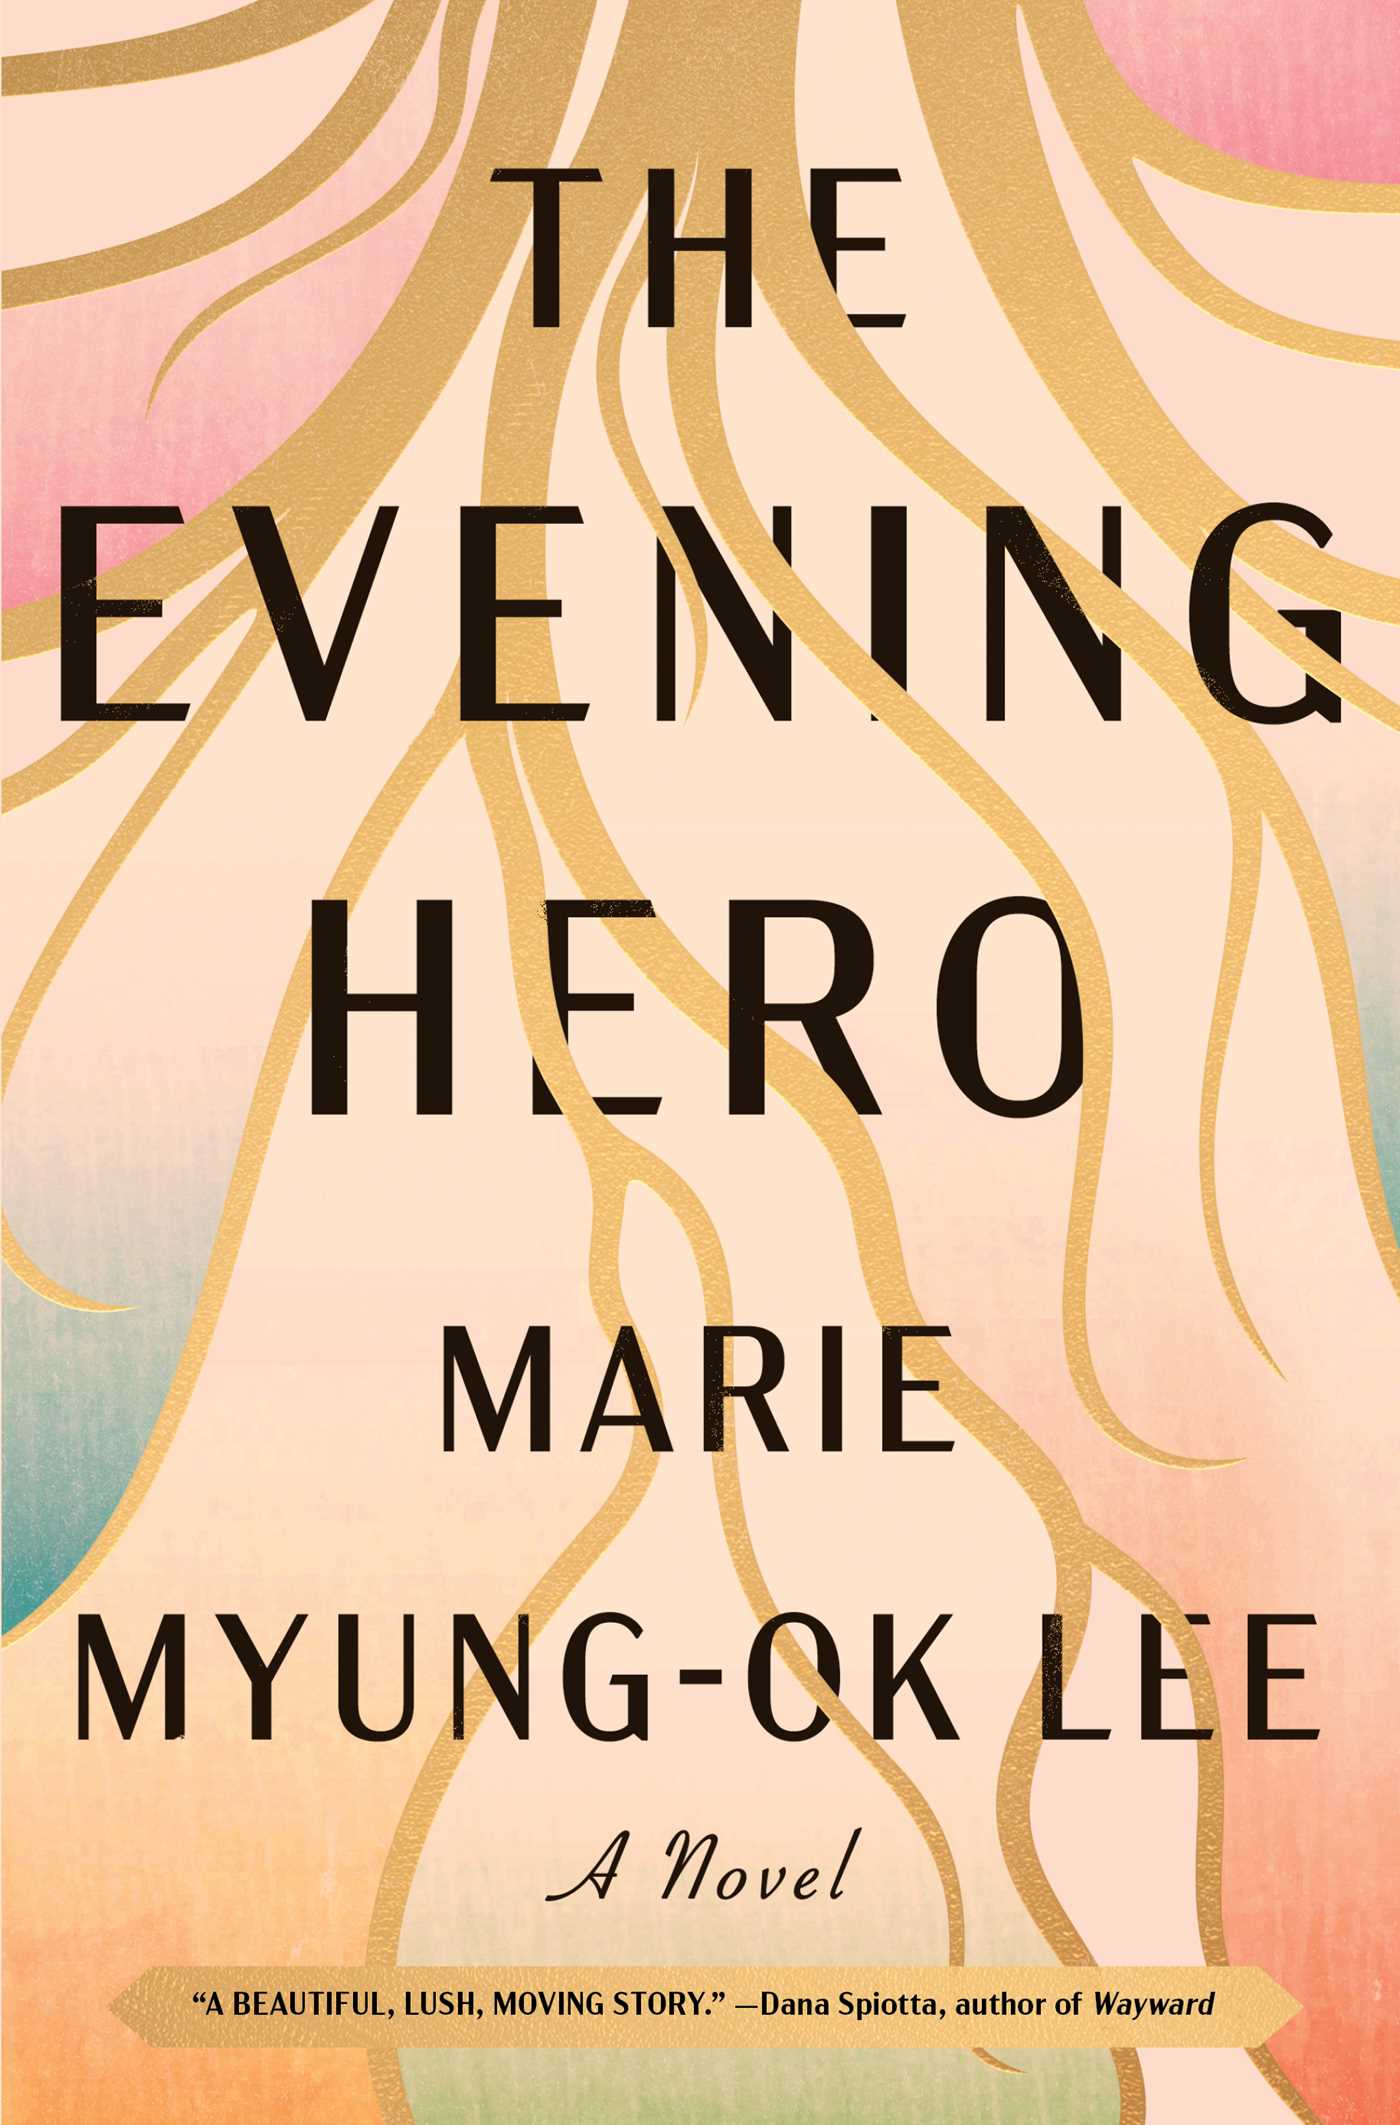 Image for "The Evening Hero"